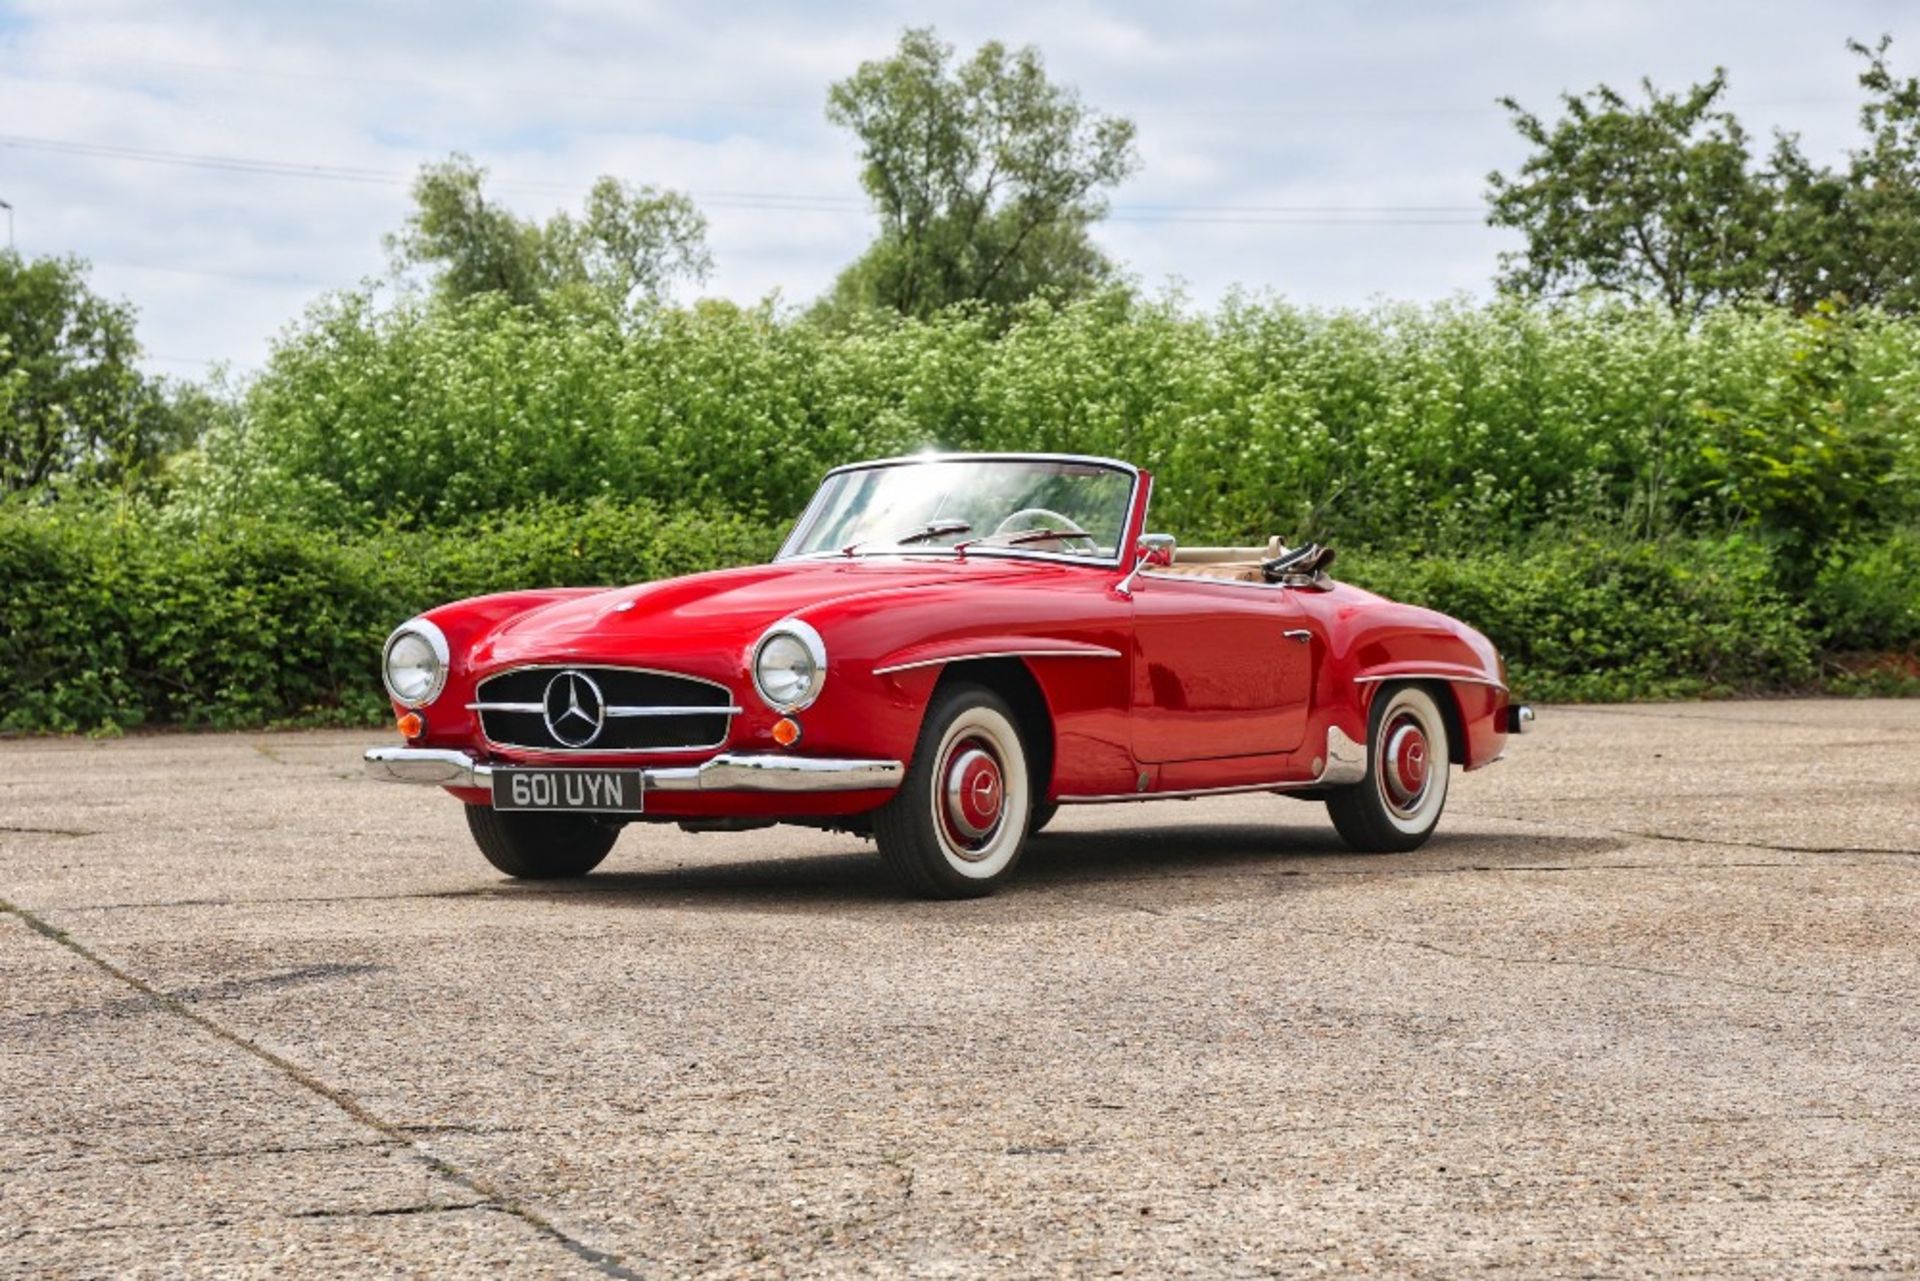 1958 MERCEDES-BENZ 190SL Registration Number: 601 UYN Chassis Number: 121.040.8500635 Recorded - Image 21 of 23